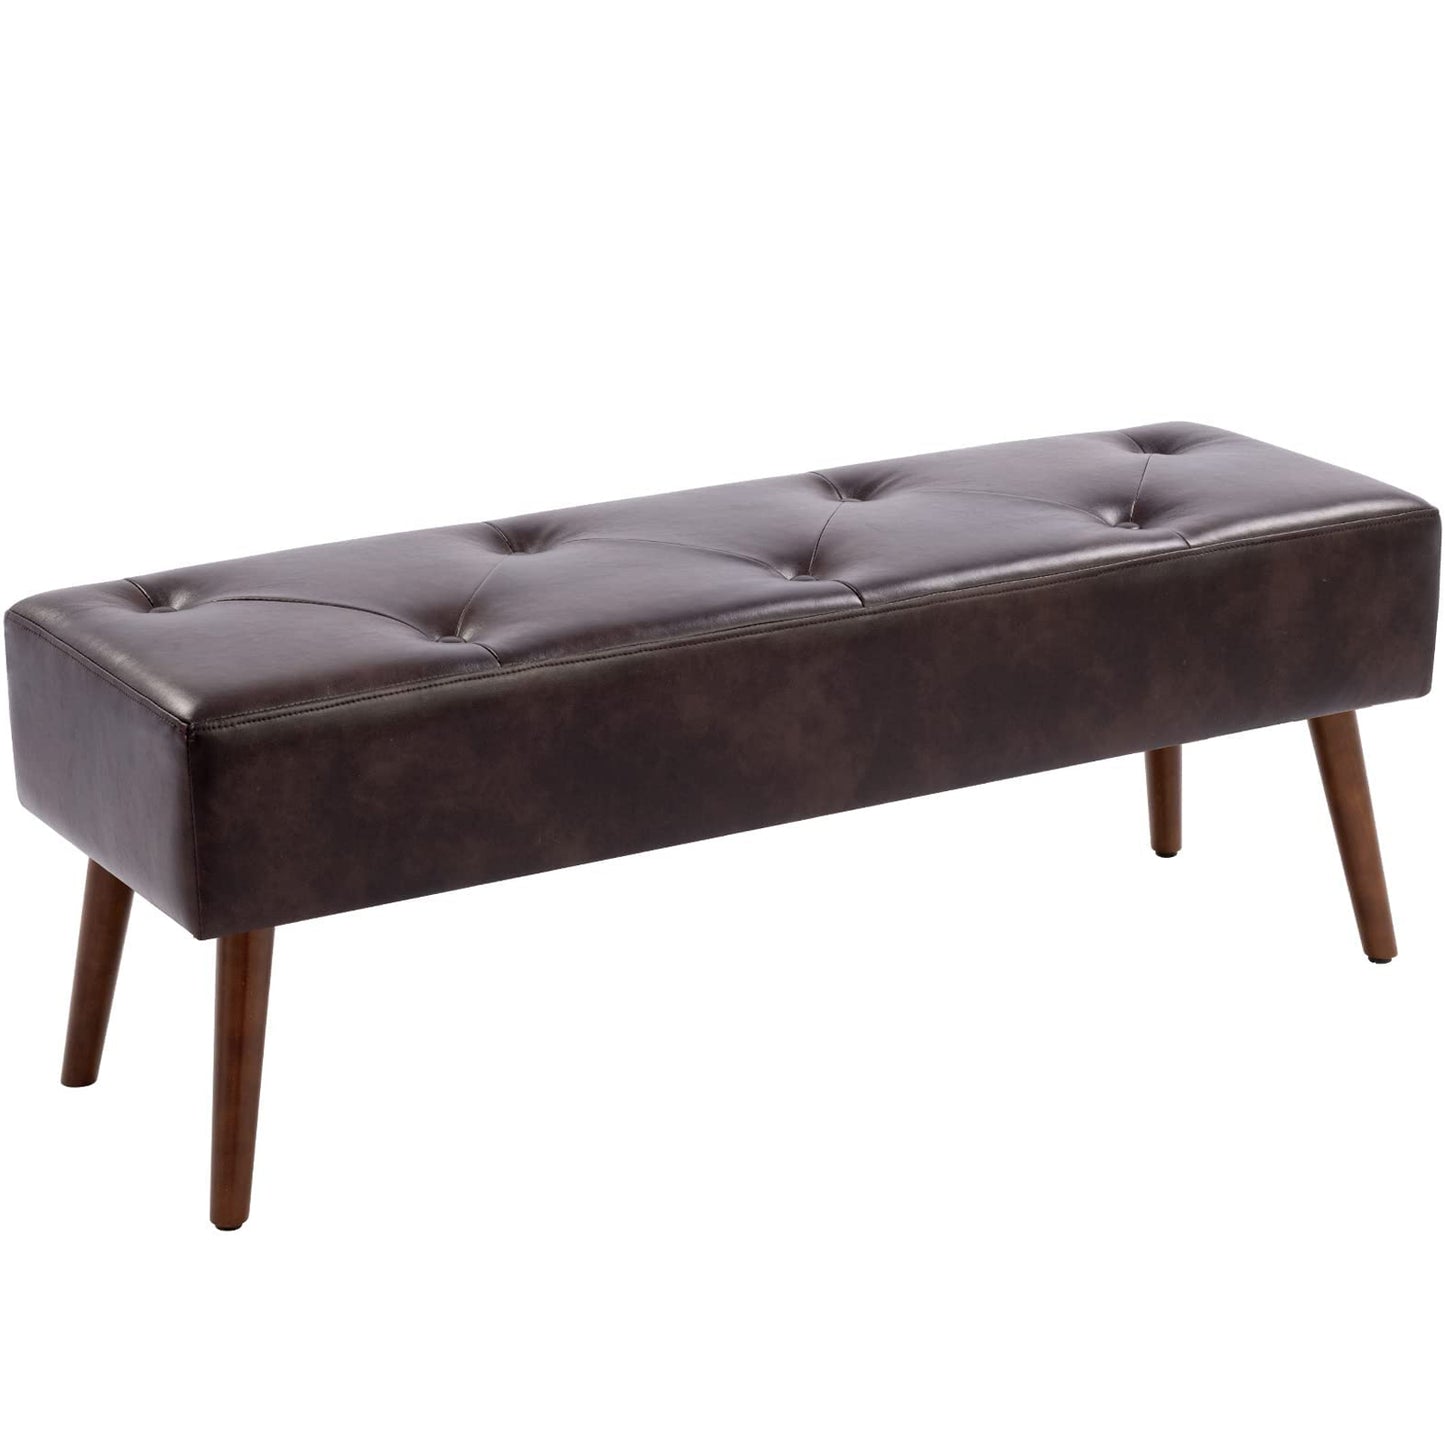 SYNGAR Upholstered Bench, Modern Button Tufted Rectangular Footrest for Bedroom Entryway Channel, Leather Bench for Bedroom End of Bed, Entryway Ottoman Bench with Rubber Wood Legs, Brown